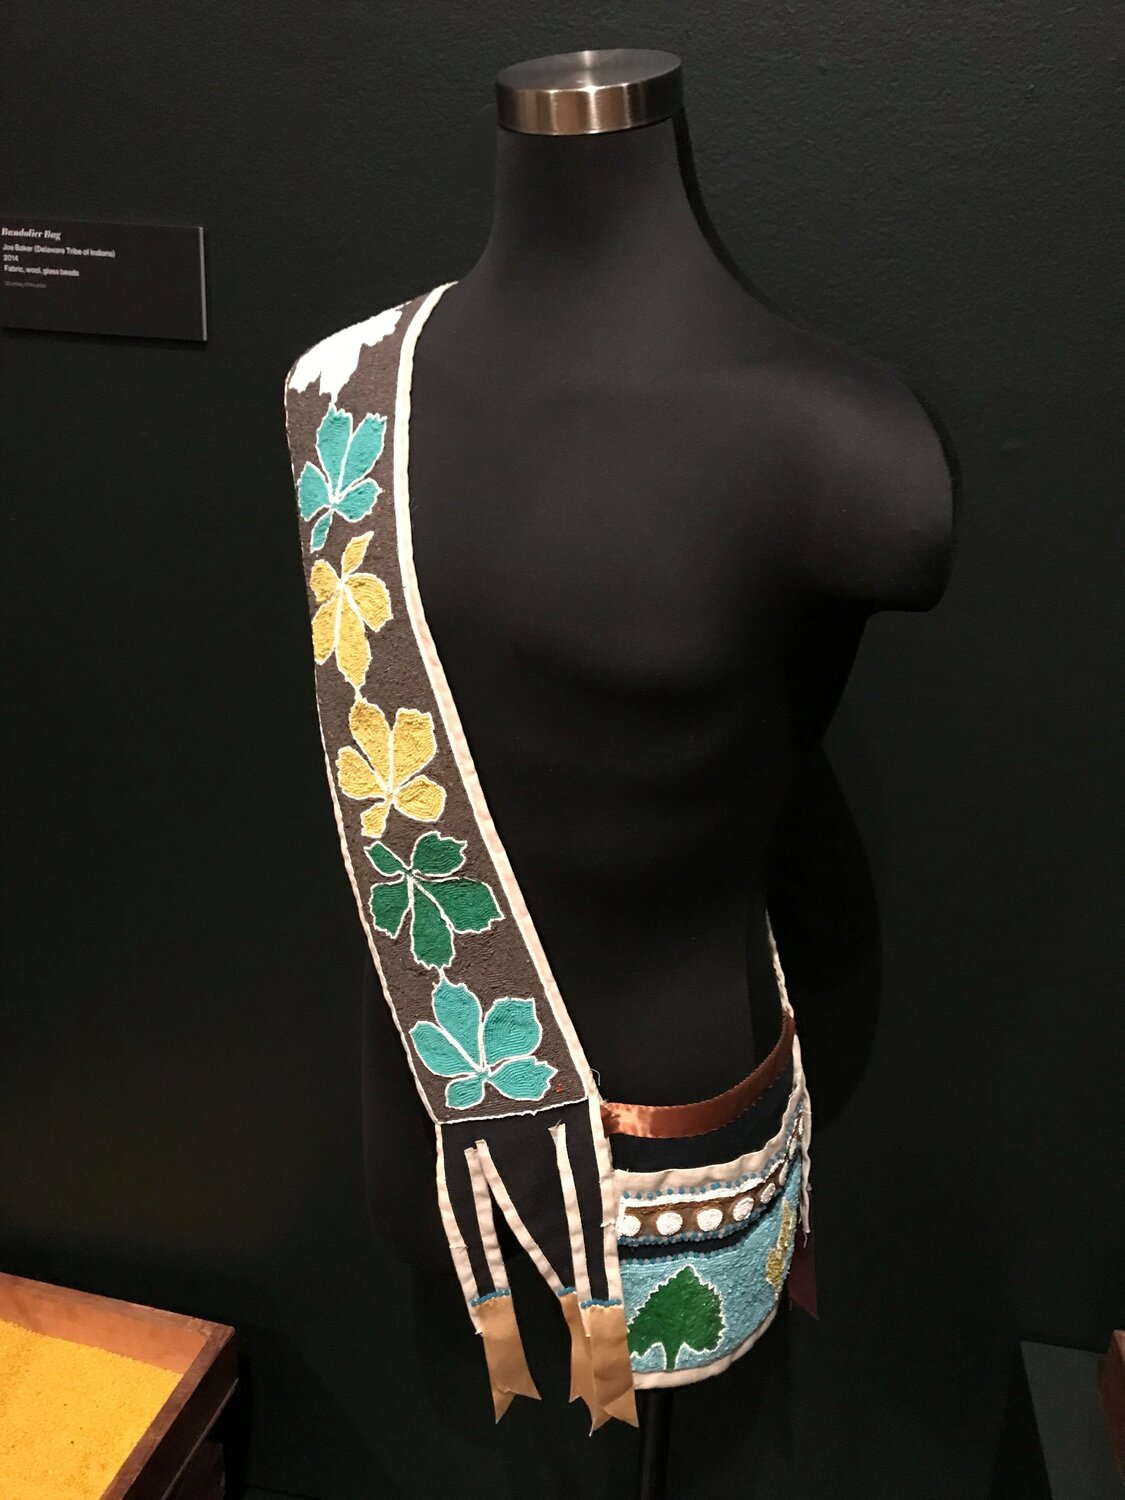 Lenape artist Joe Baker, of the Delaware Tribe of Indians, created this Bandolier Bag out of fabric, wool and glass beads.